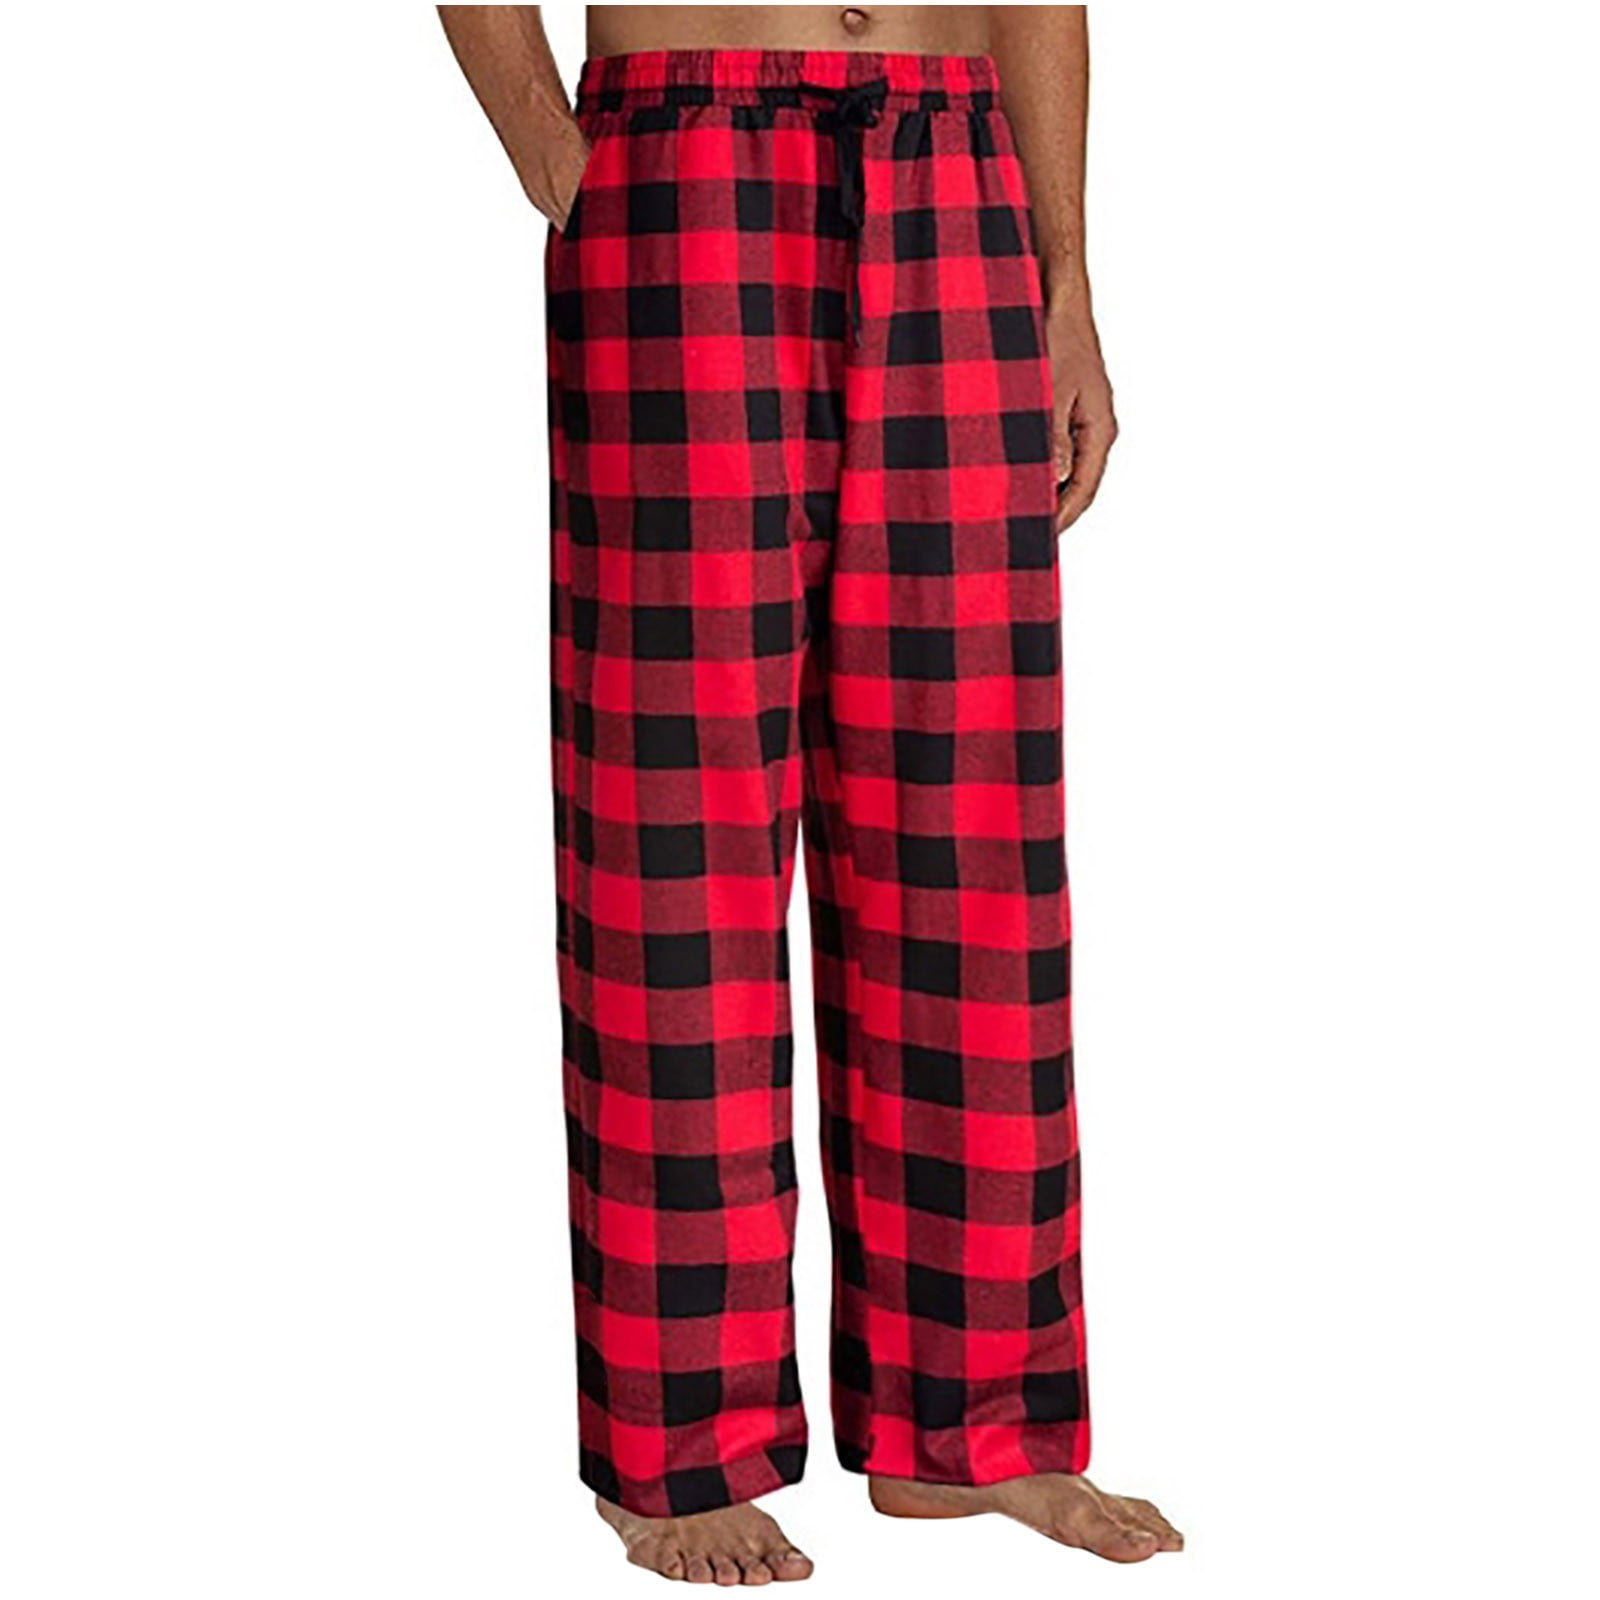 Pajama Sale Men\'s Price Reduced Plaid Trousers,Red,L Plaid Sport Pants Fashion Clearance Juebong and Loose Casual